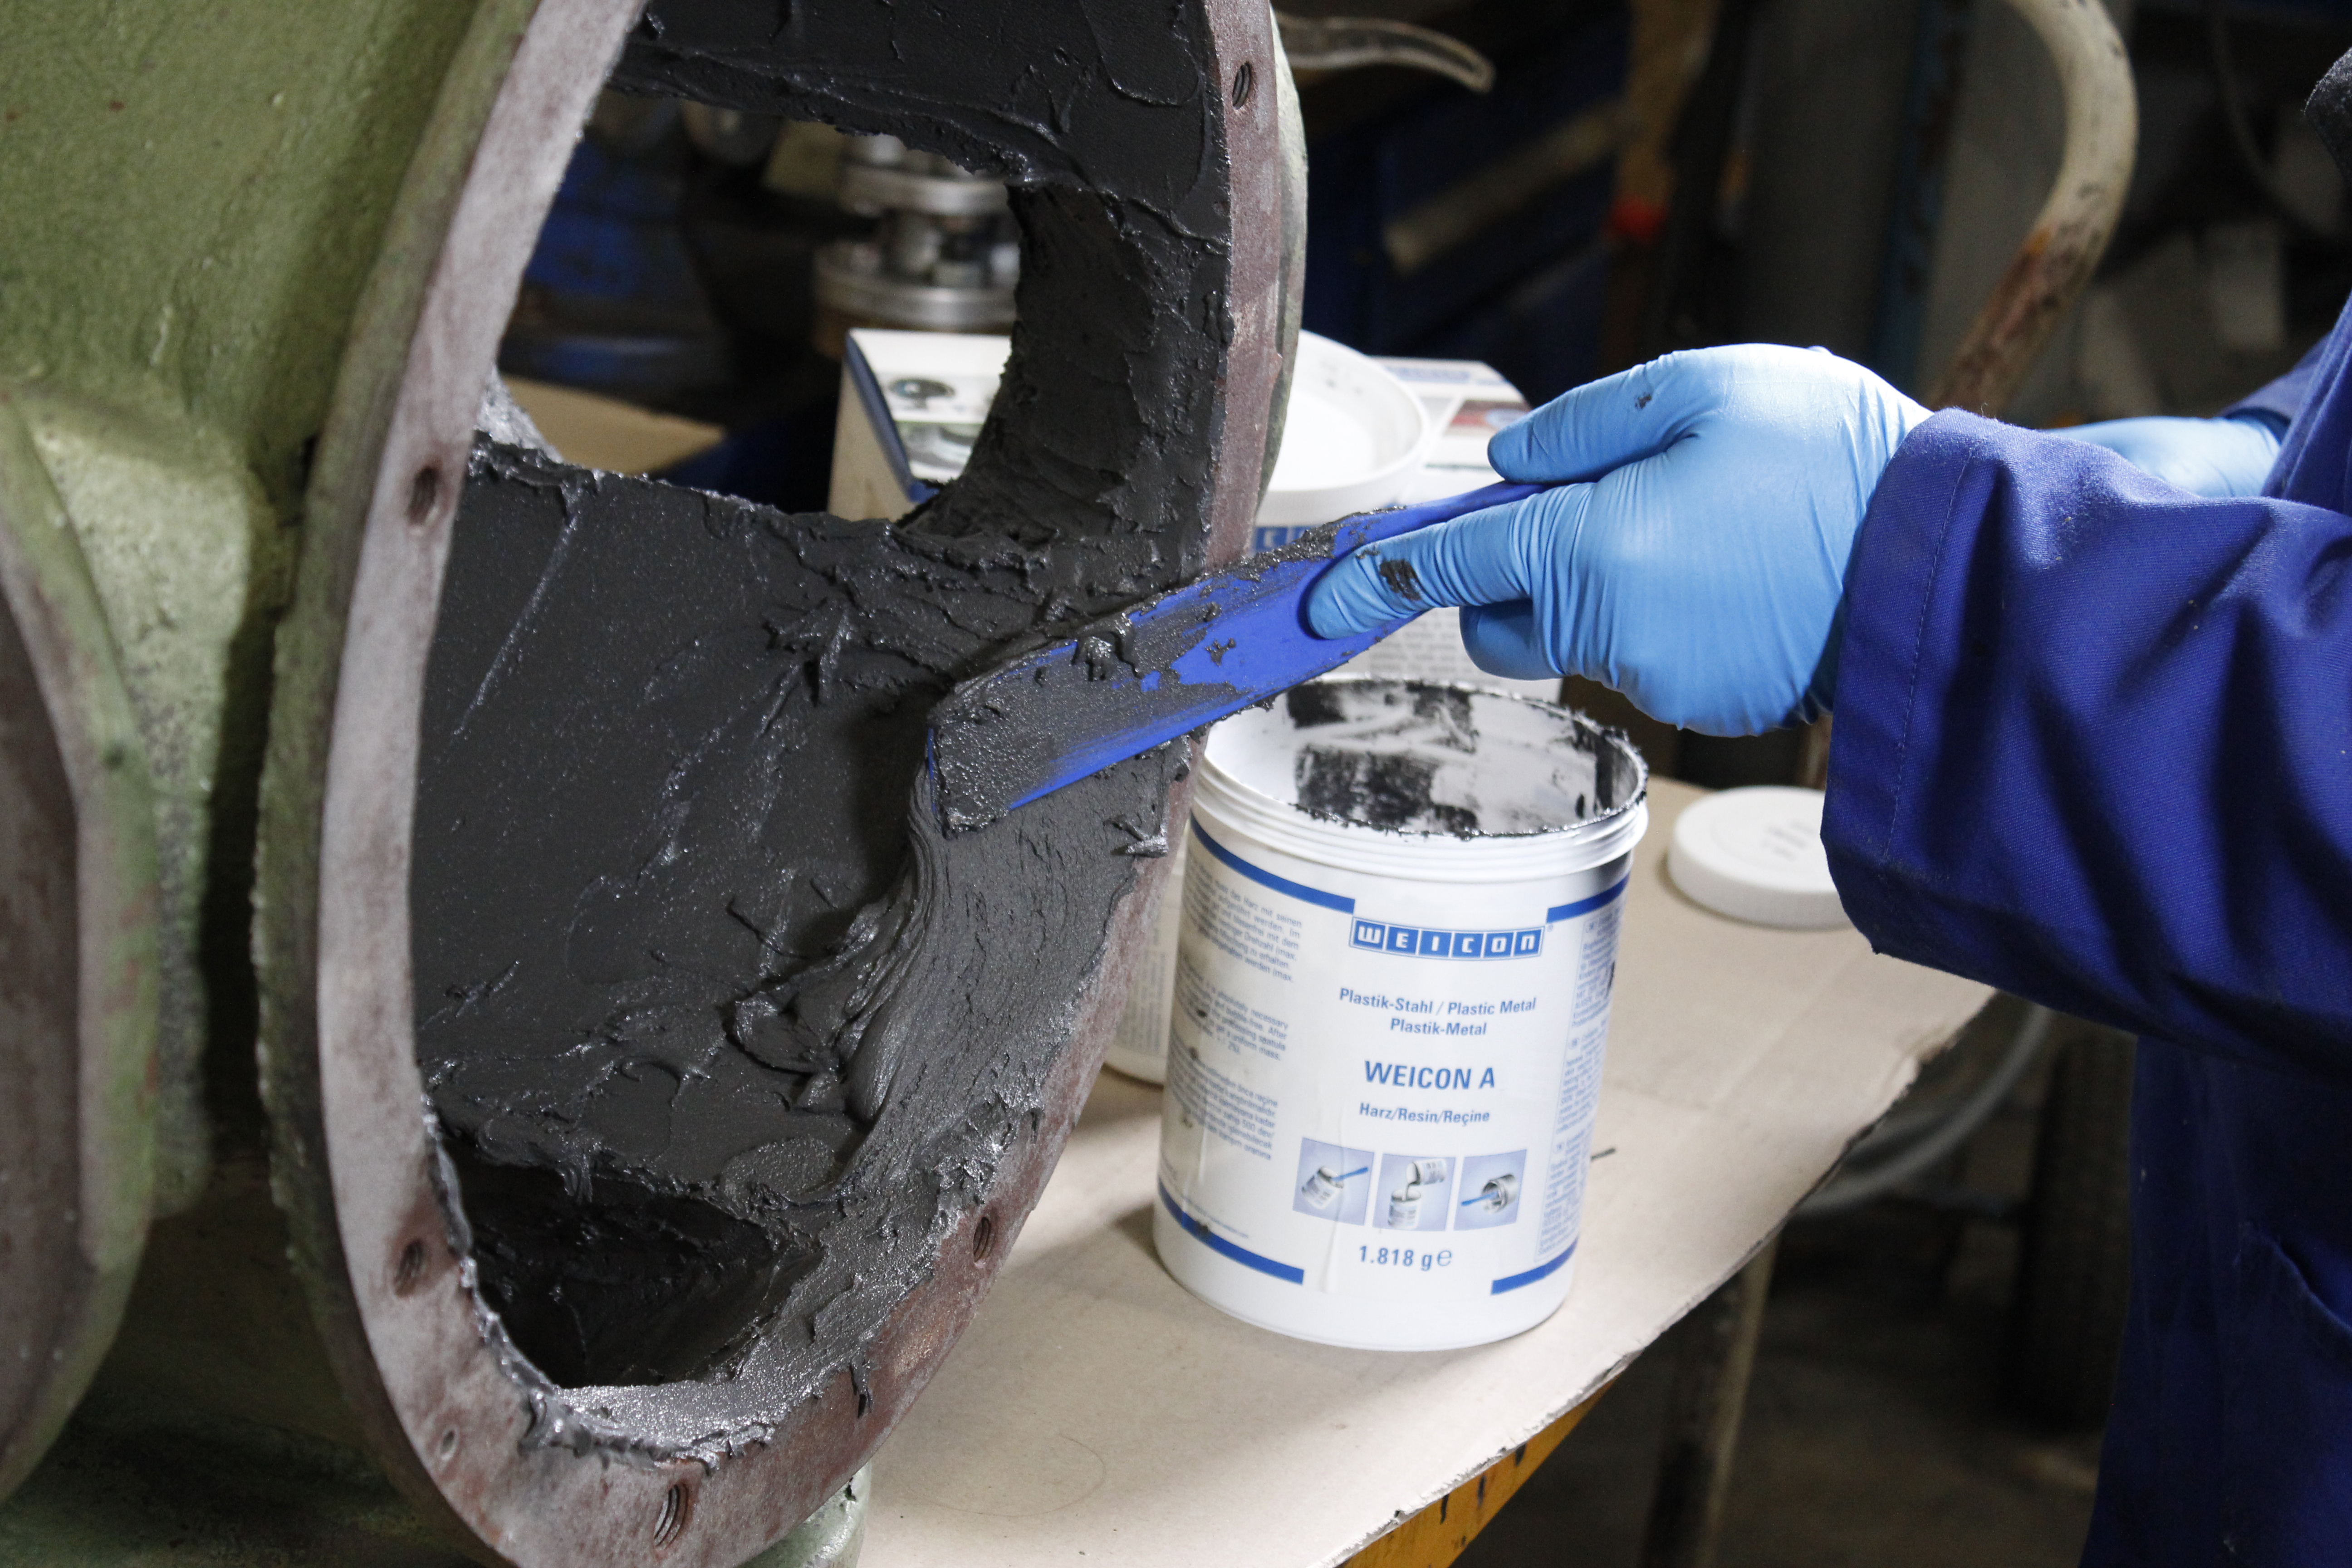 WEICON A | steel-filled epoxy resin system for repairs and gap-filling DNV-certified